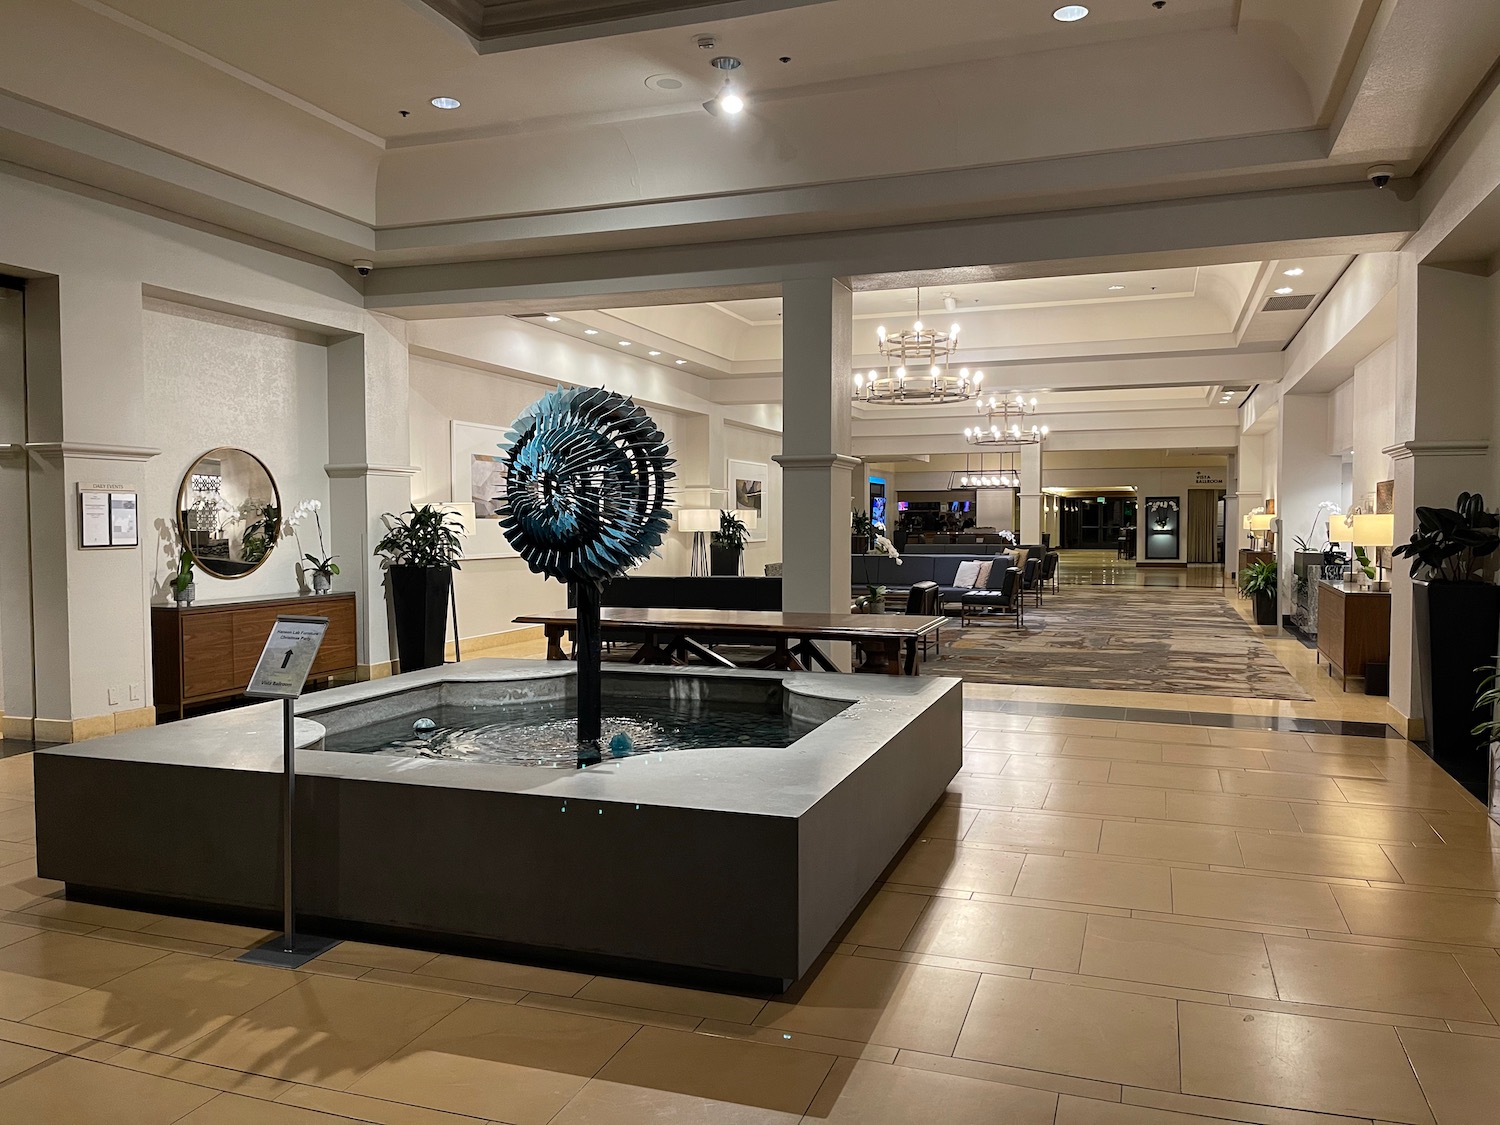 a large fountain in a lobby